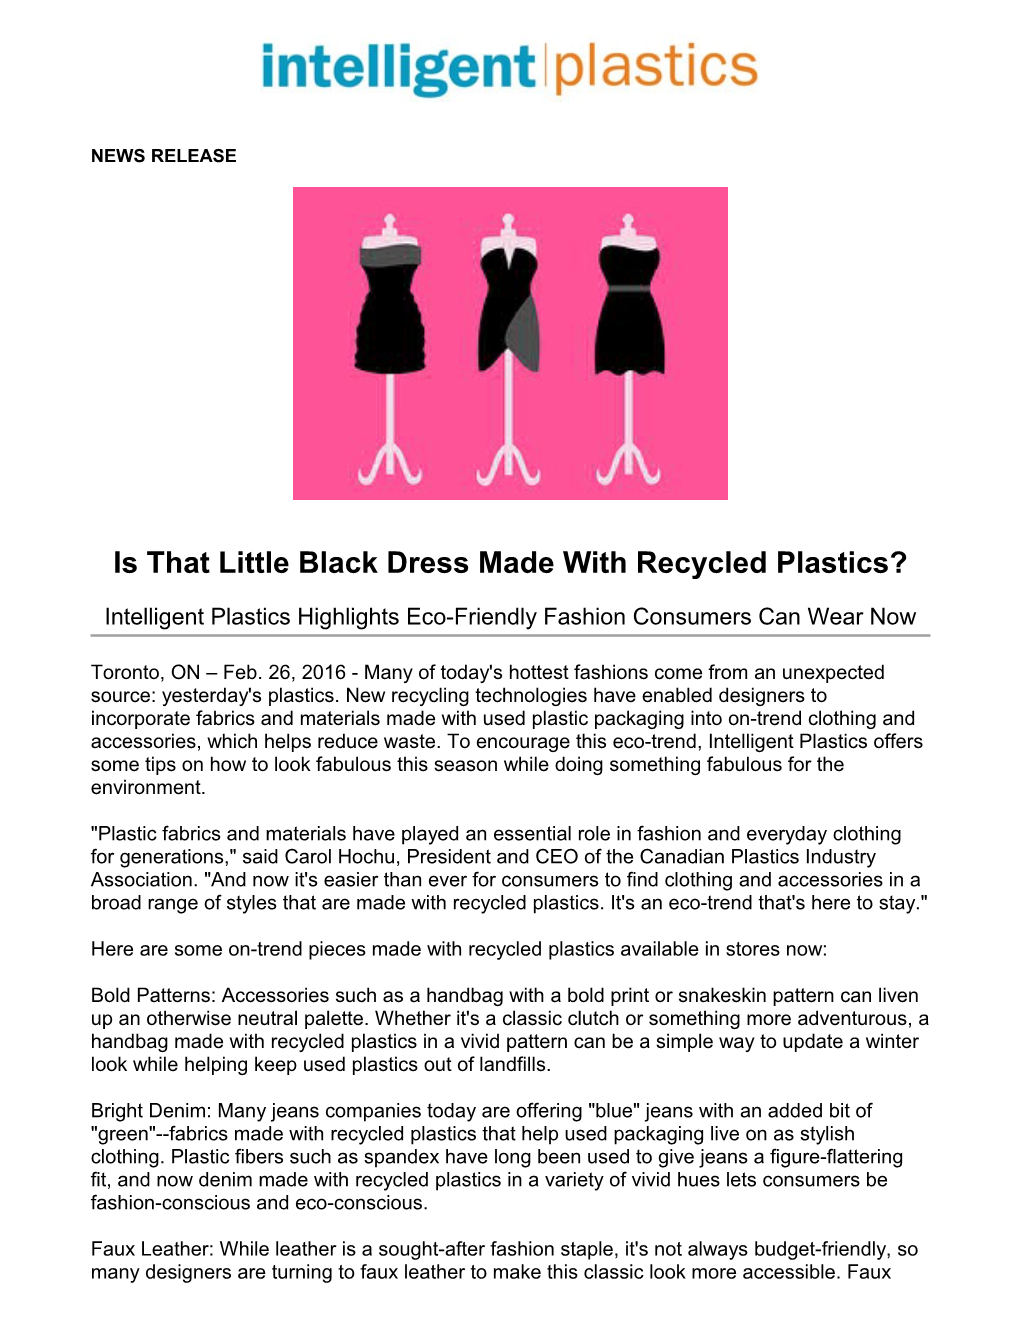 Is That Little Black Dress Made with Recycled Plastics?